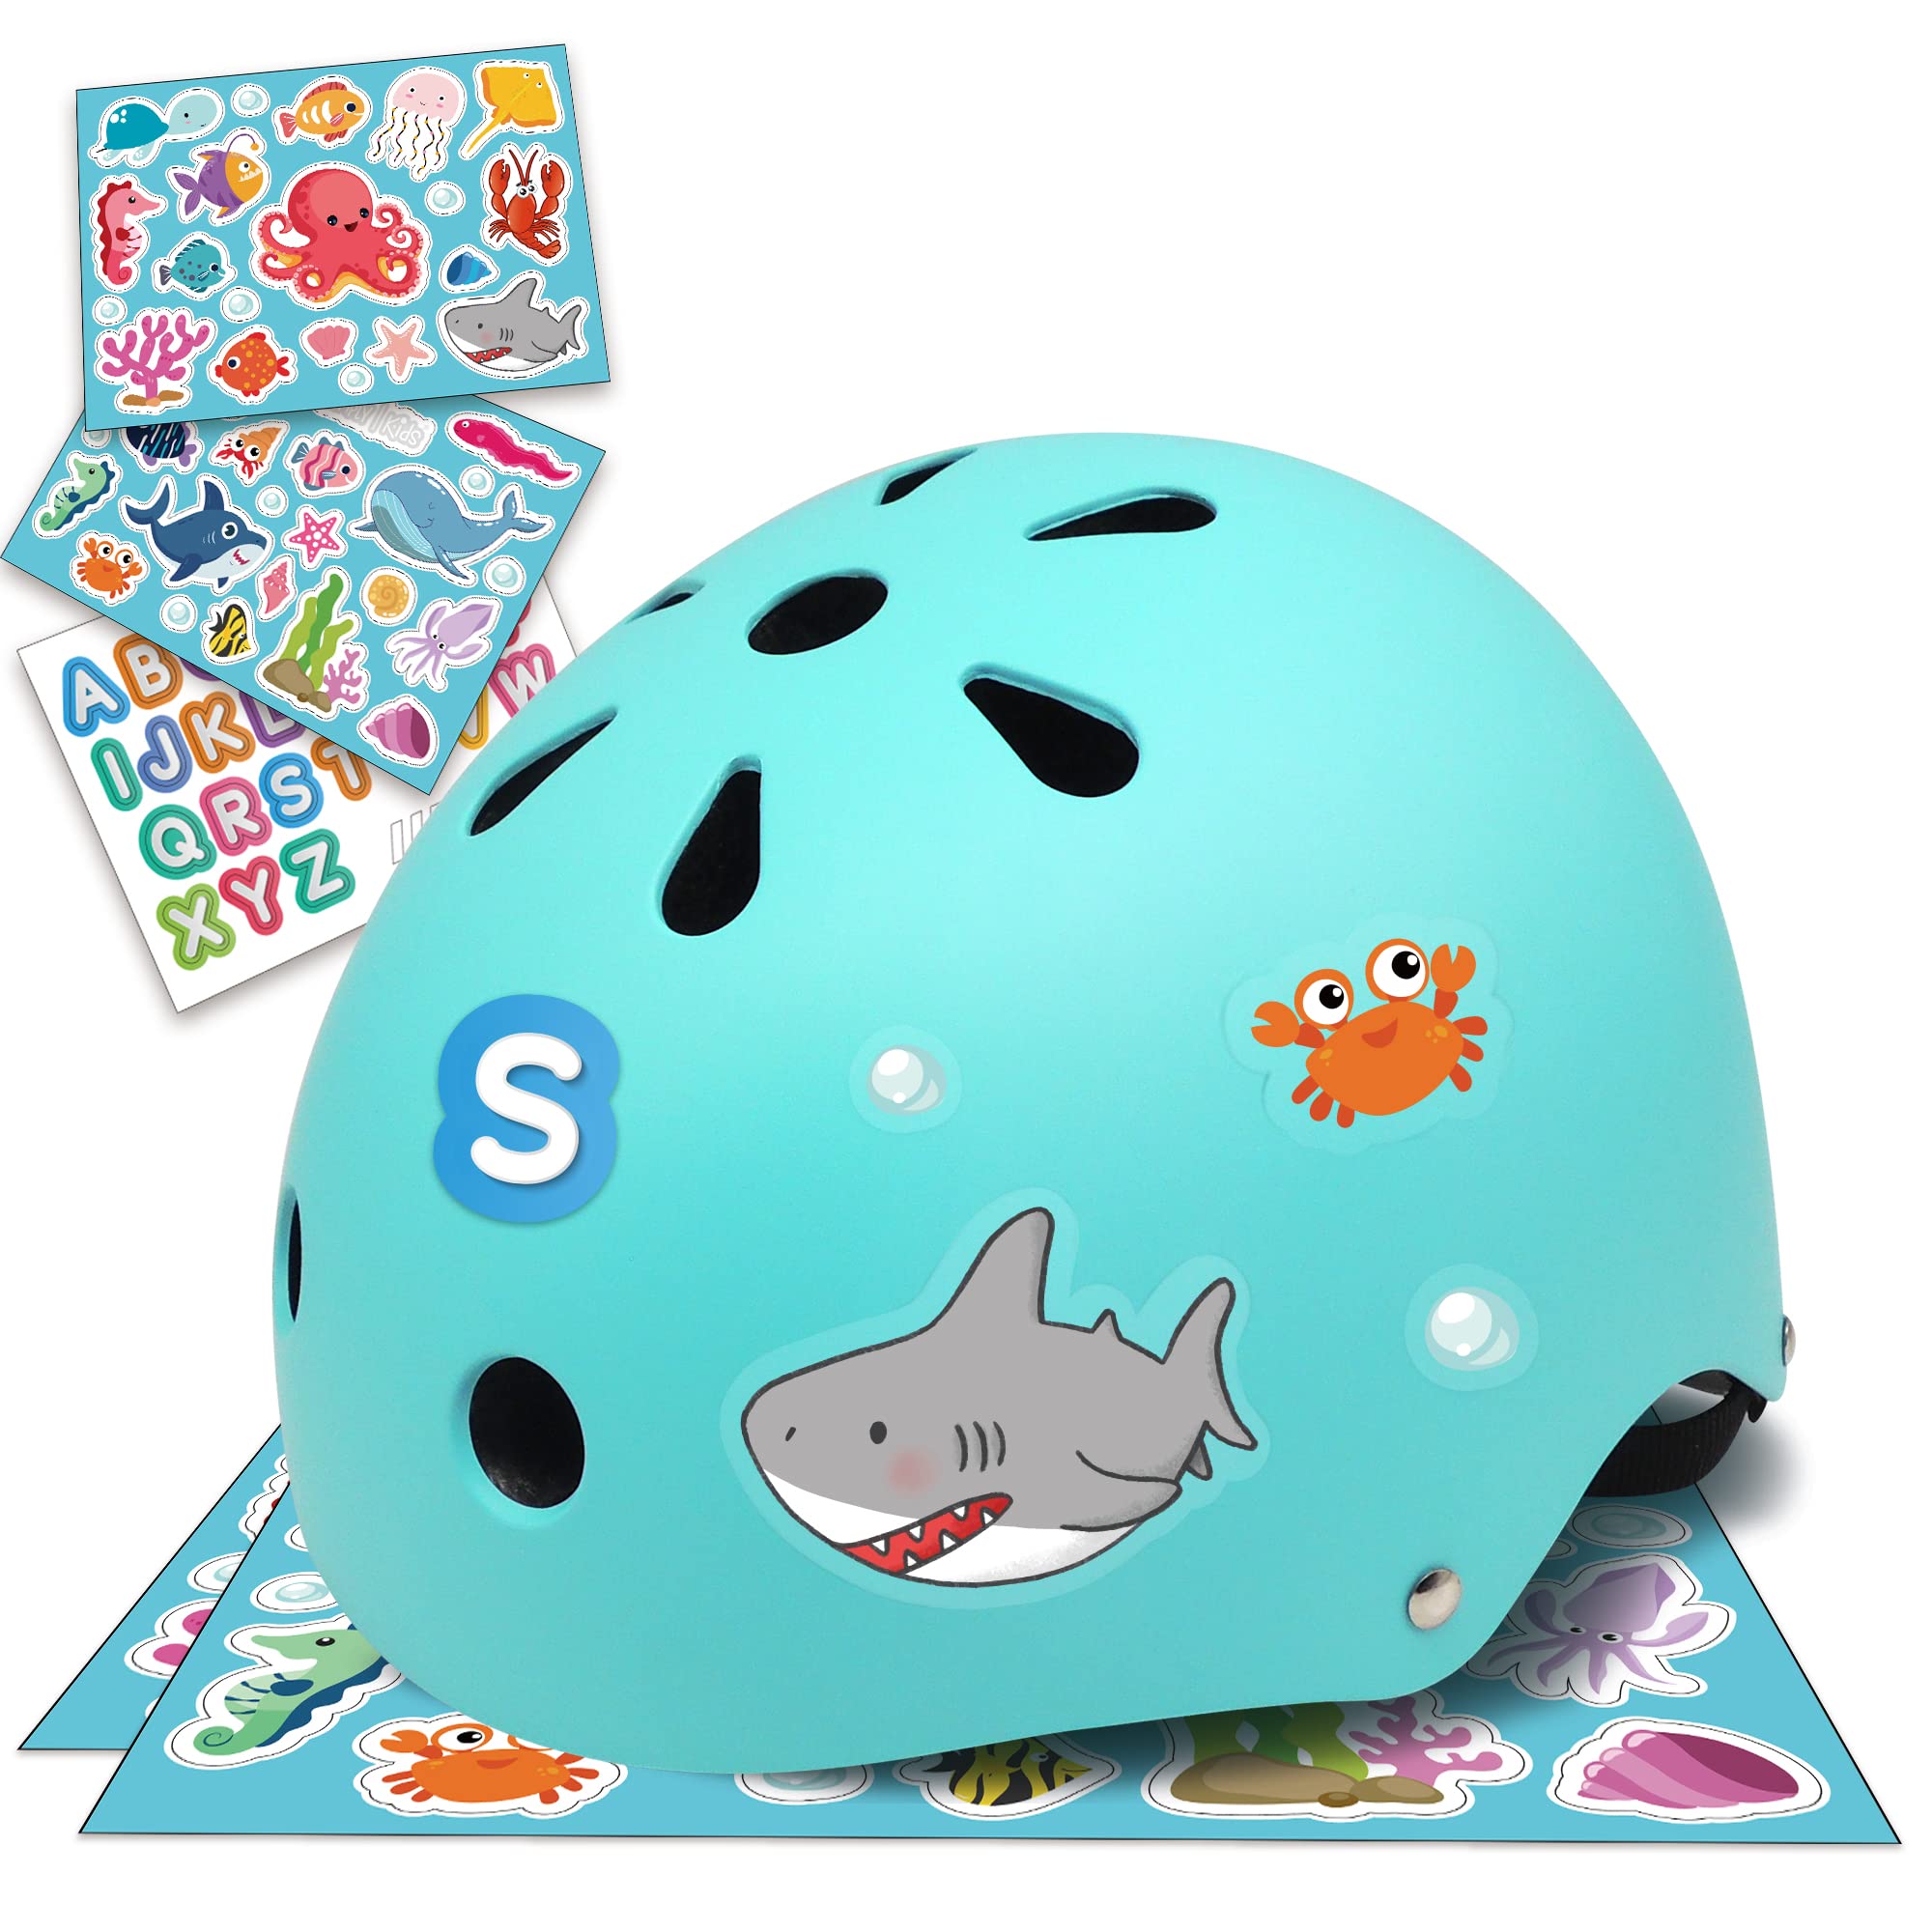 simply kids Toddler Helmet for 2-4 Years Toddler Kids Boys girls with DIY Stickers I cPSc & cE certified for Bike Skateboard Roller-Skating 